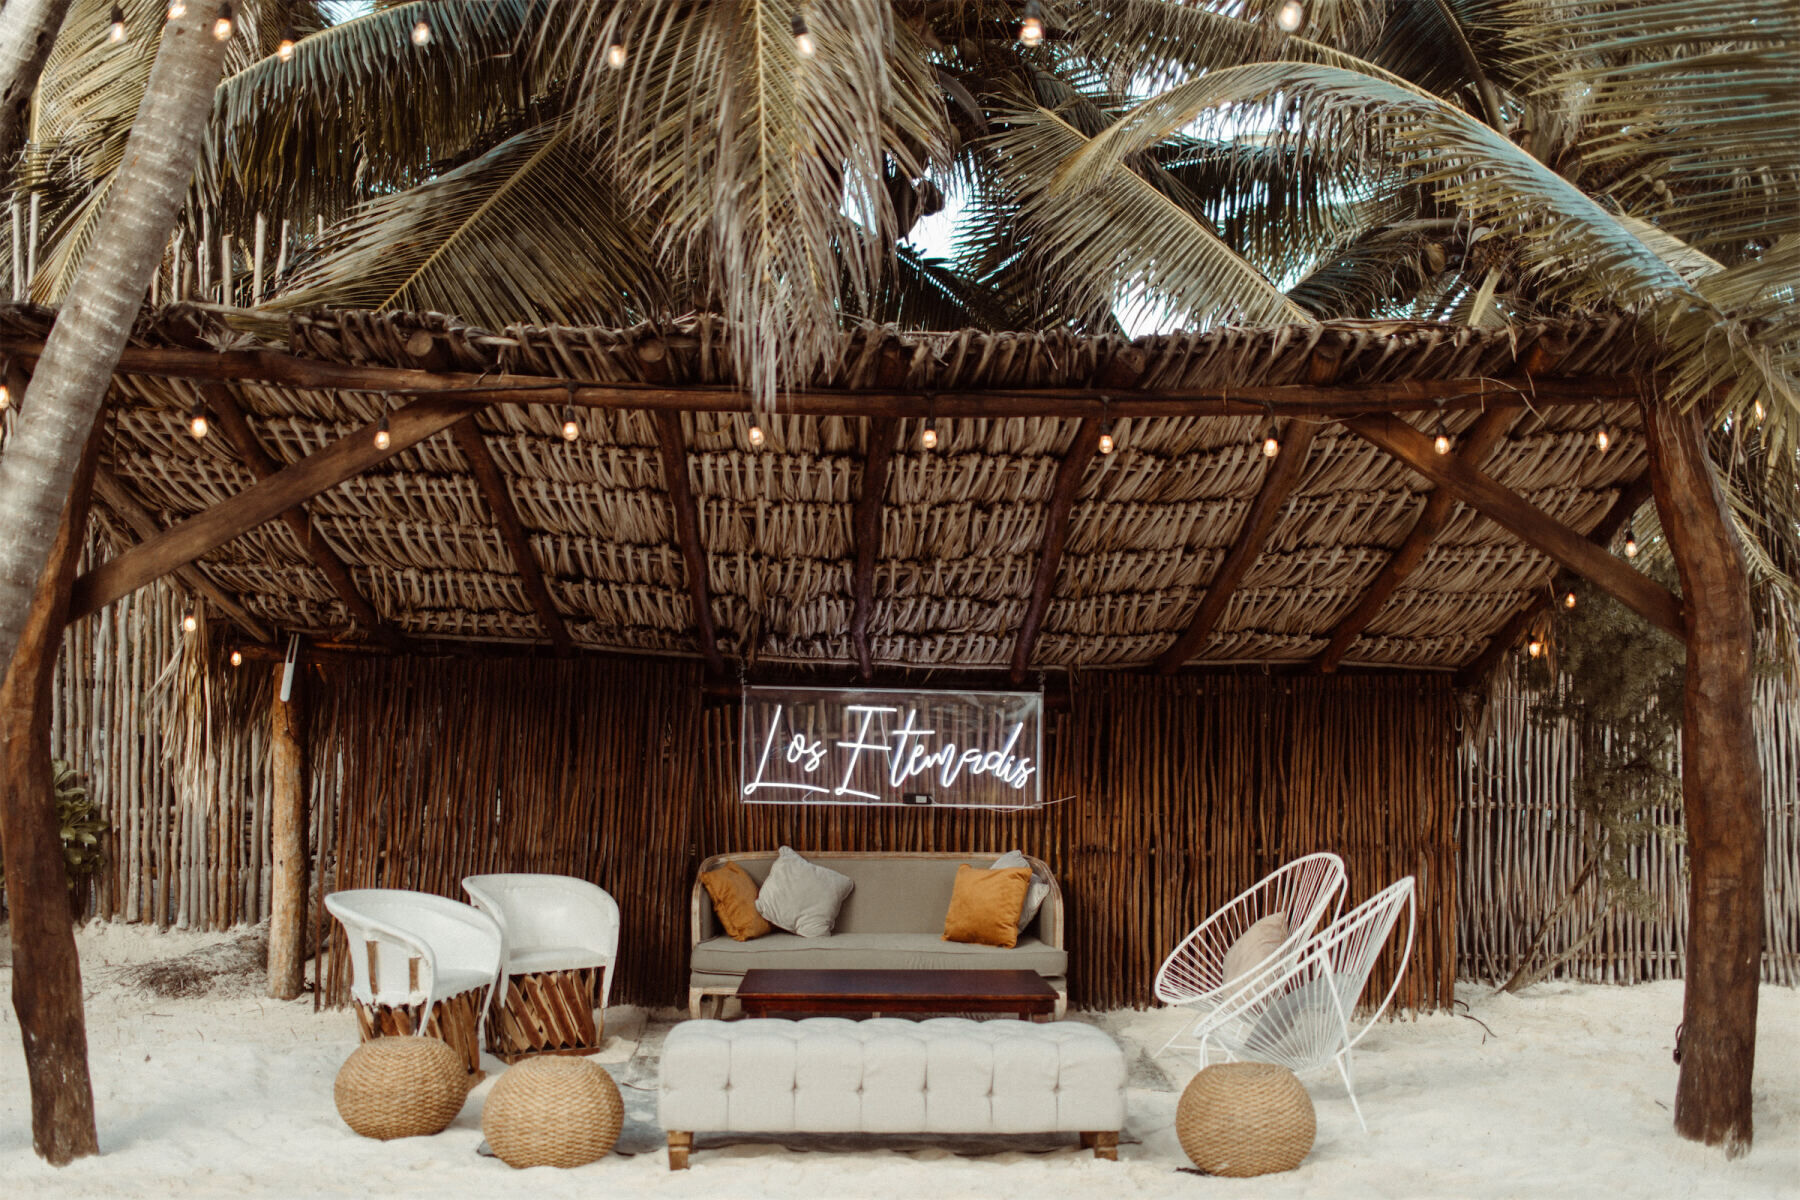 Mexican wedding: neutral modern lounge furniture underneath a straw cabana, featuring a neon sign